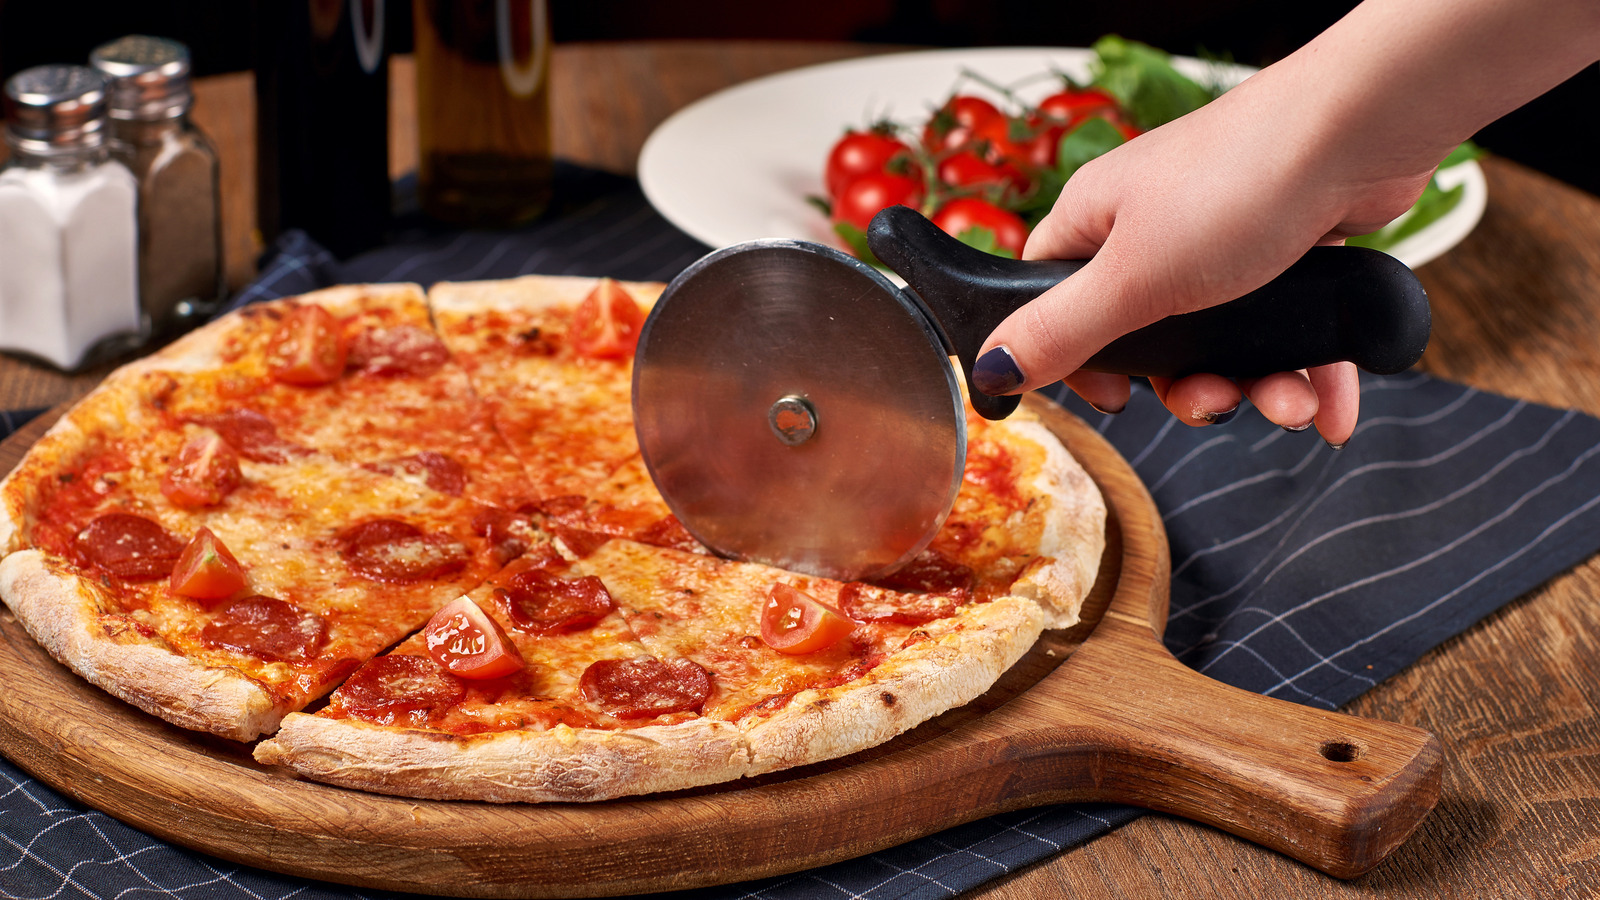 Replace Your Pizza Cutter With This Handy Office Tool